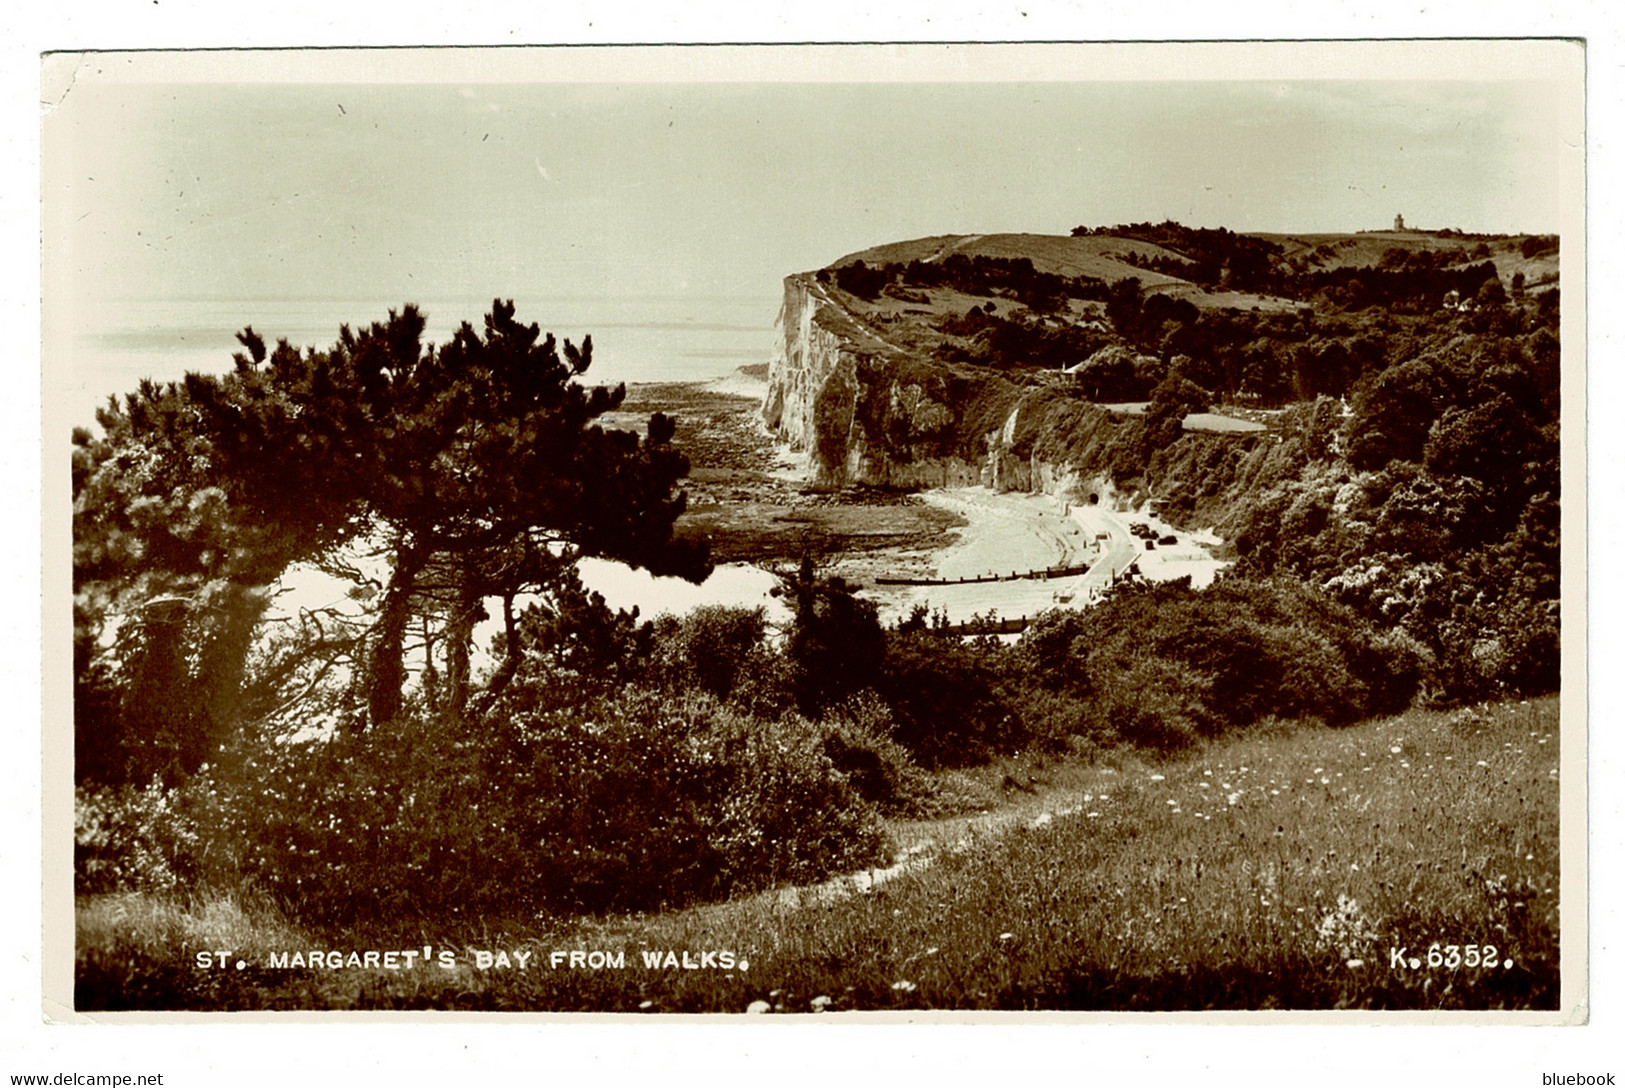 Ref 1406 - 1957 Real Photo Postcard - St Margaret's Bay From Walks - Dover Kent - Dover